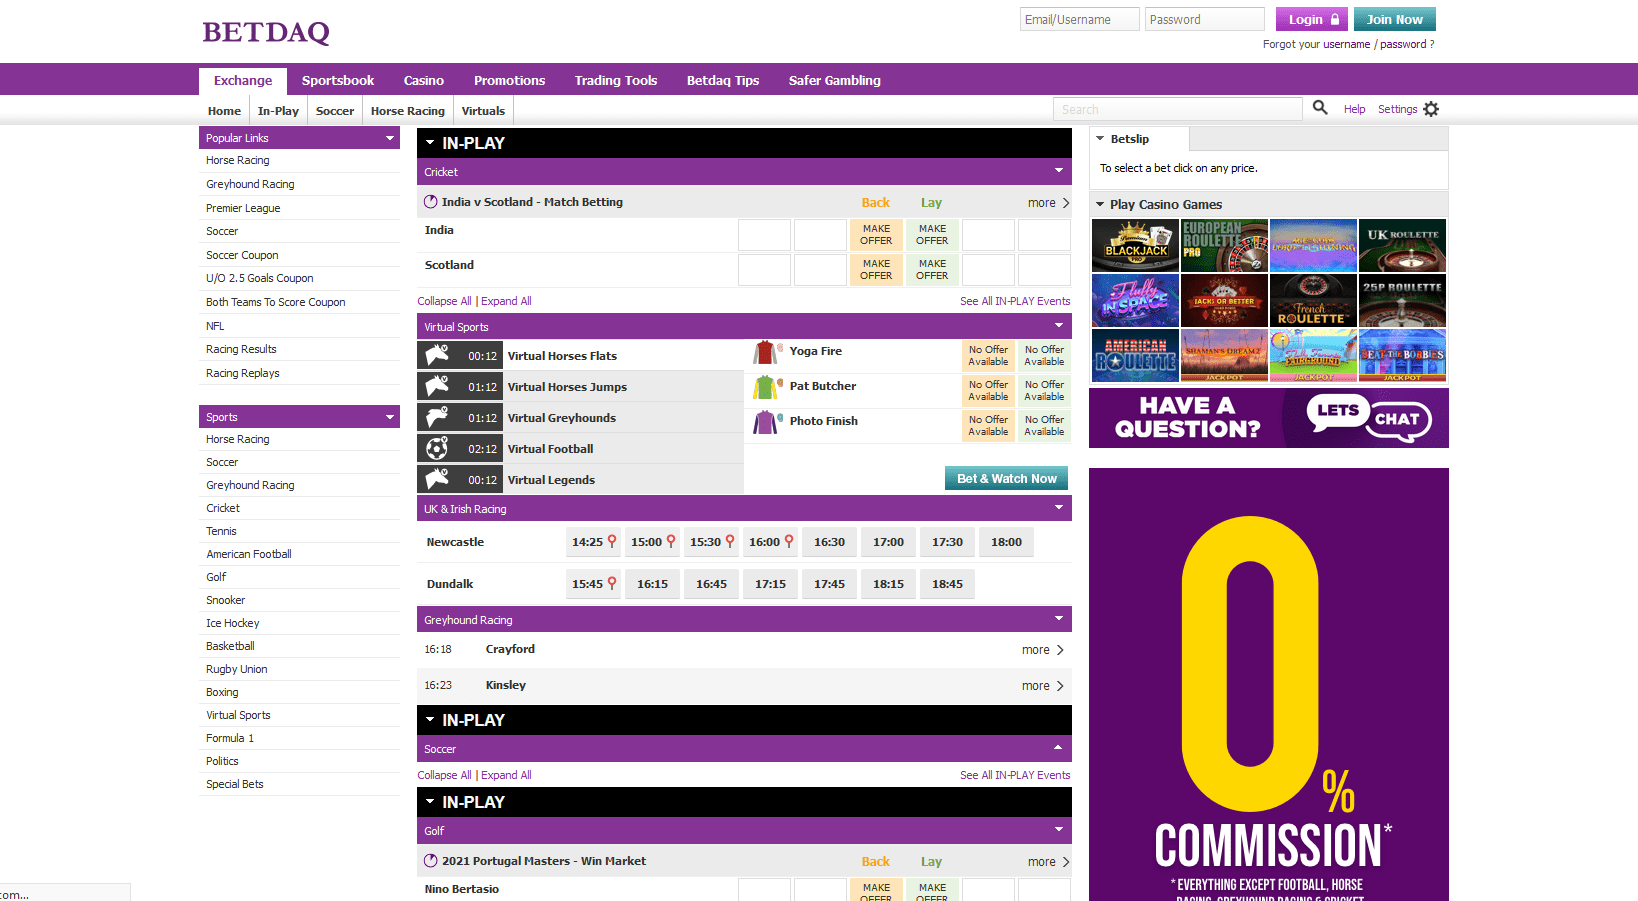 Betdaq - Betting Exchange Site with Up to £1,000 Cashback Offer